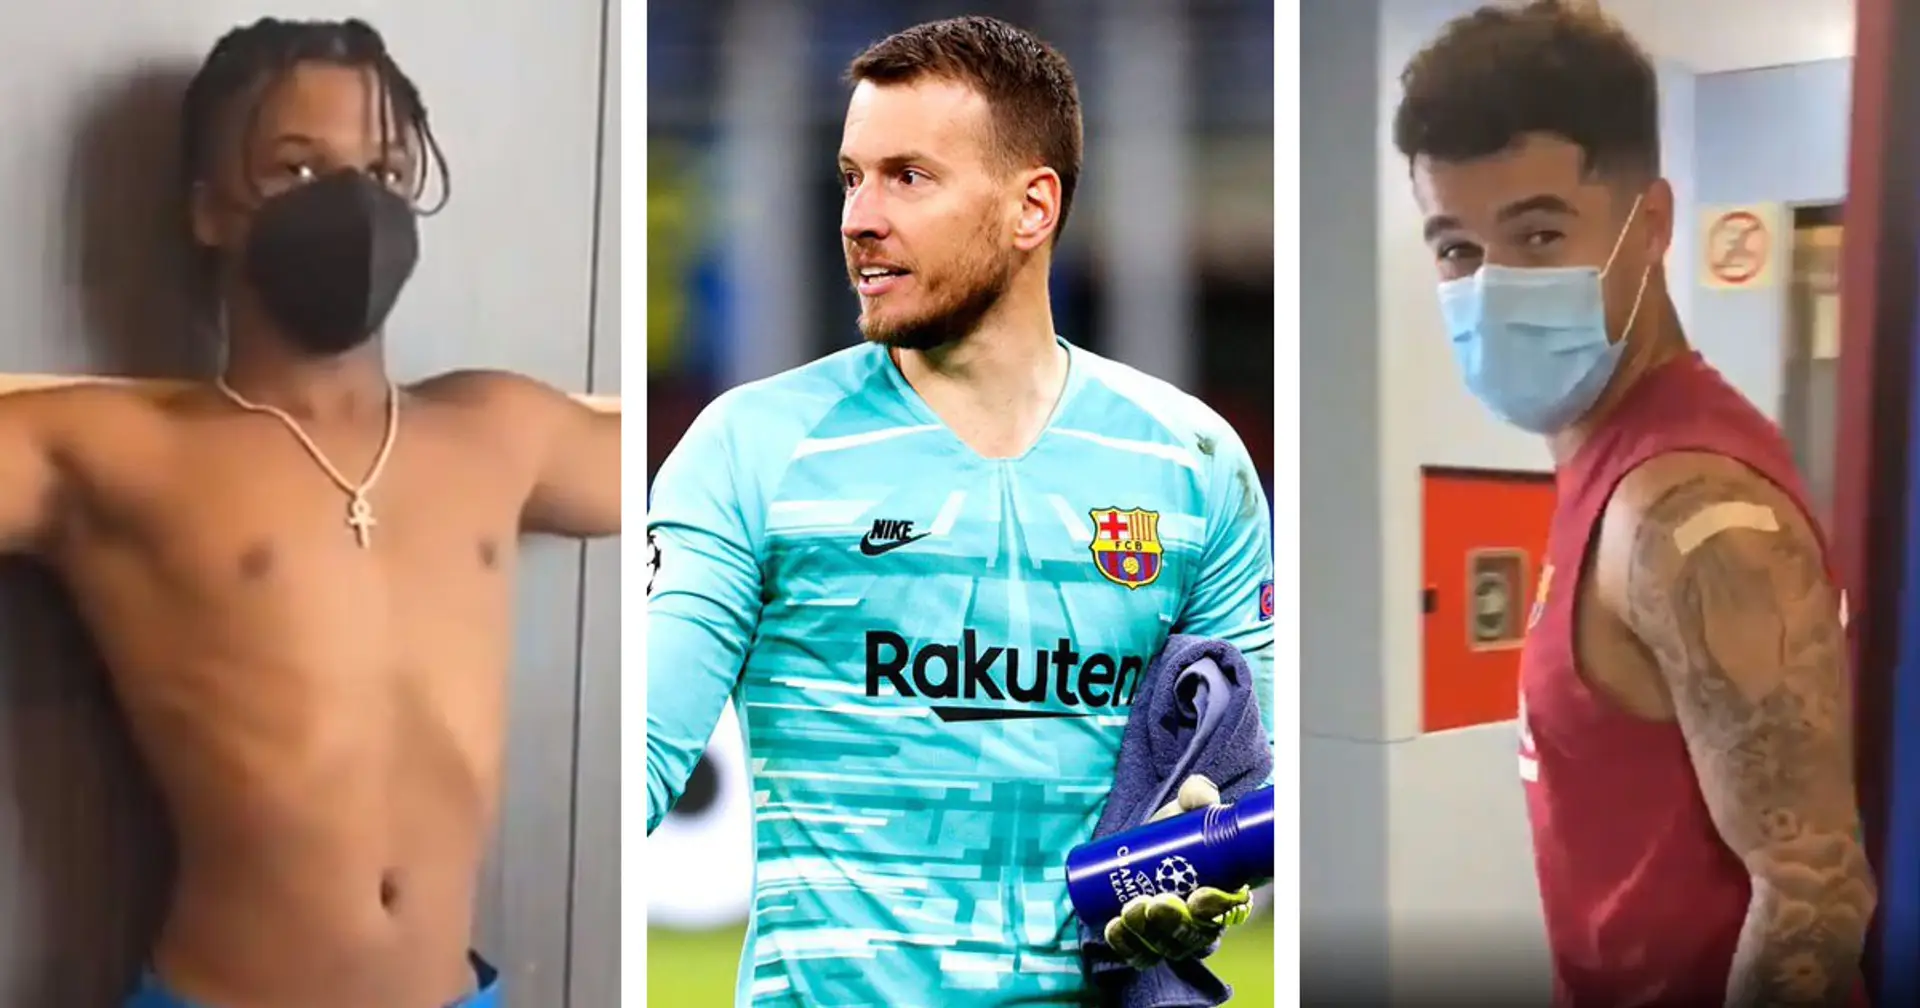 Players complete medicals ahead of pre-season & 3 more under-radar stories at Barca